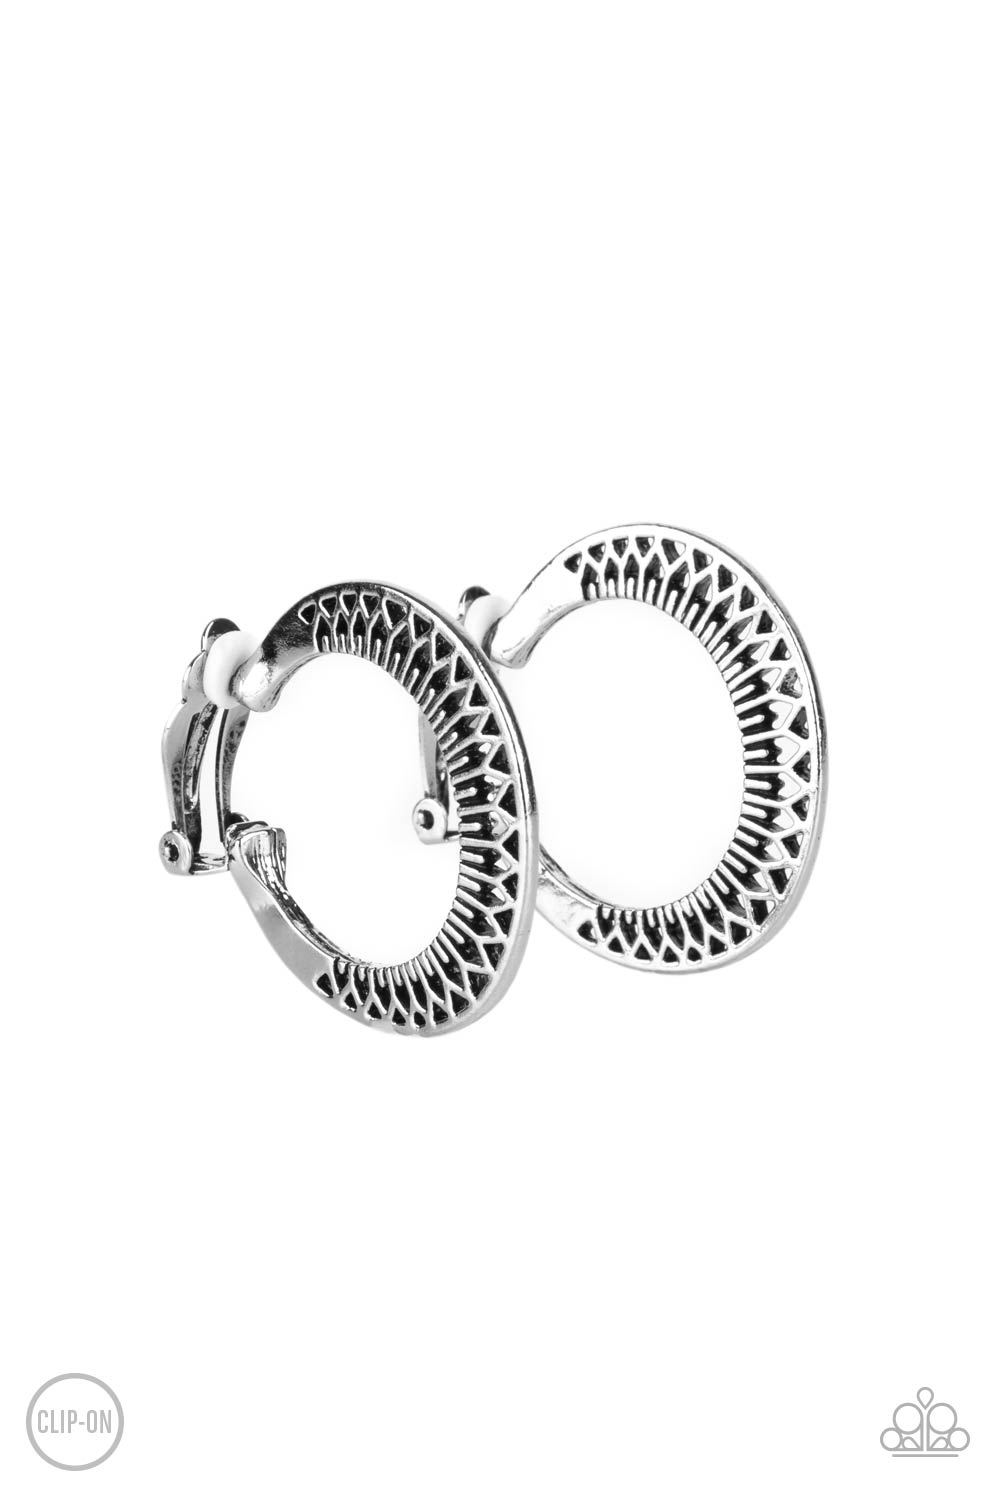 Moon Child Charisma - Silver Clip-On Hoop Earrings stenciled in a petal-like texture, a silver frame delicately curves into a floral patterned hoop. Earring attaches to a standard clip-on fitting. Hoop measures approximately 1 1/2" in diameter.
Sold as one pair of clip-on earrings.
